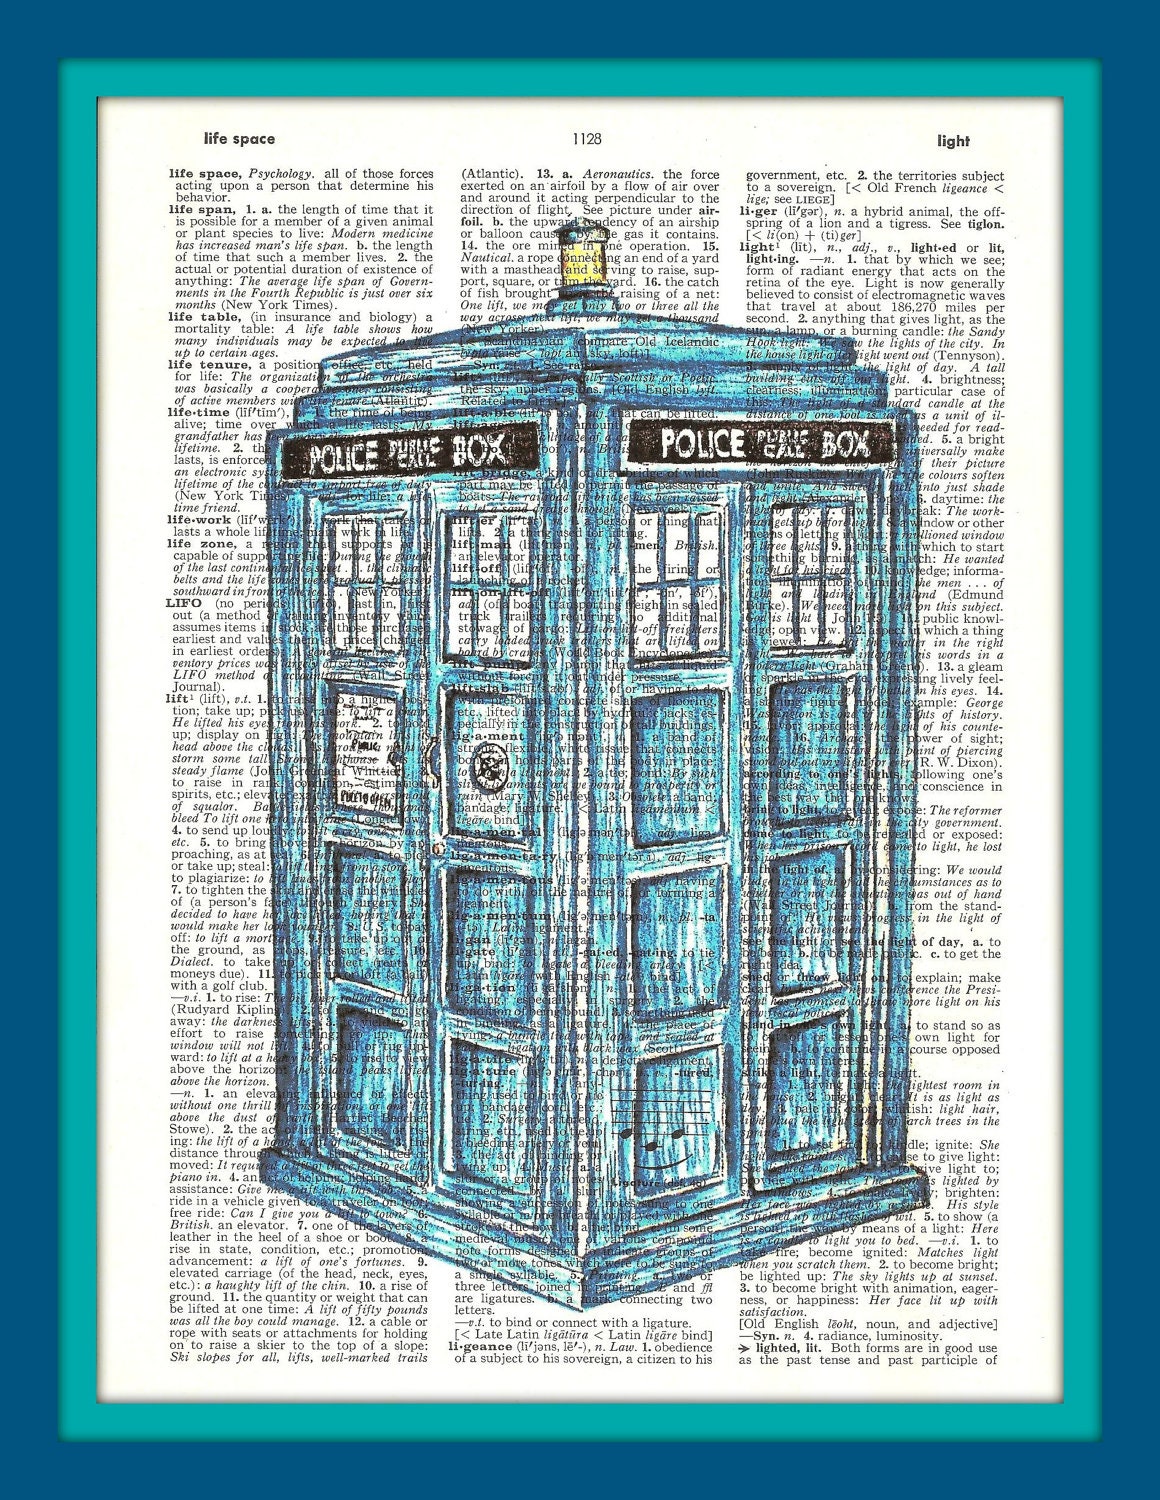 Buy Any 2 Prints get 1 Free Dr. Who Tardis Hand Drawn Vintage Dictionary Art